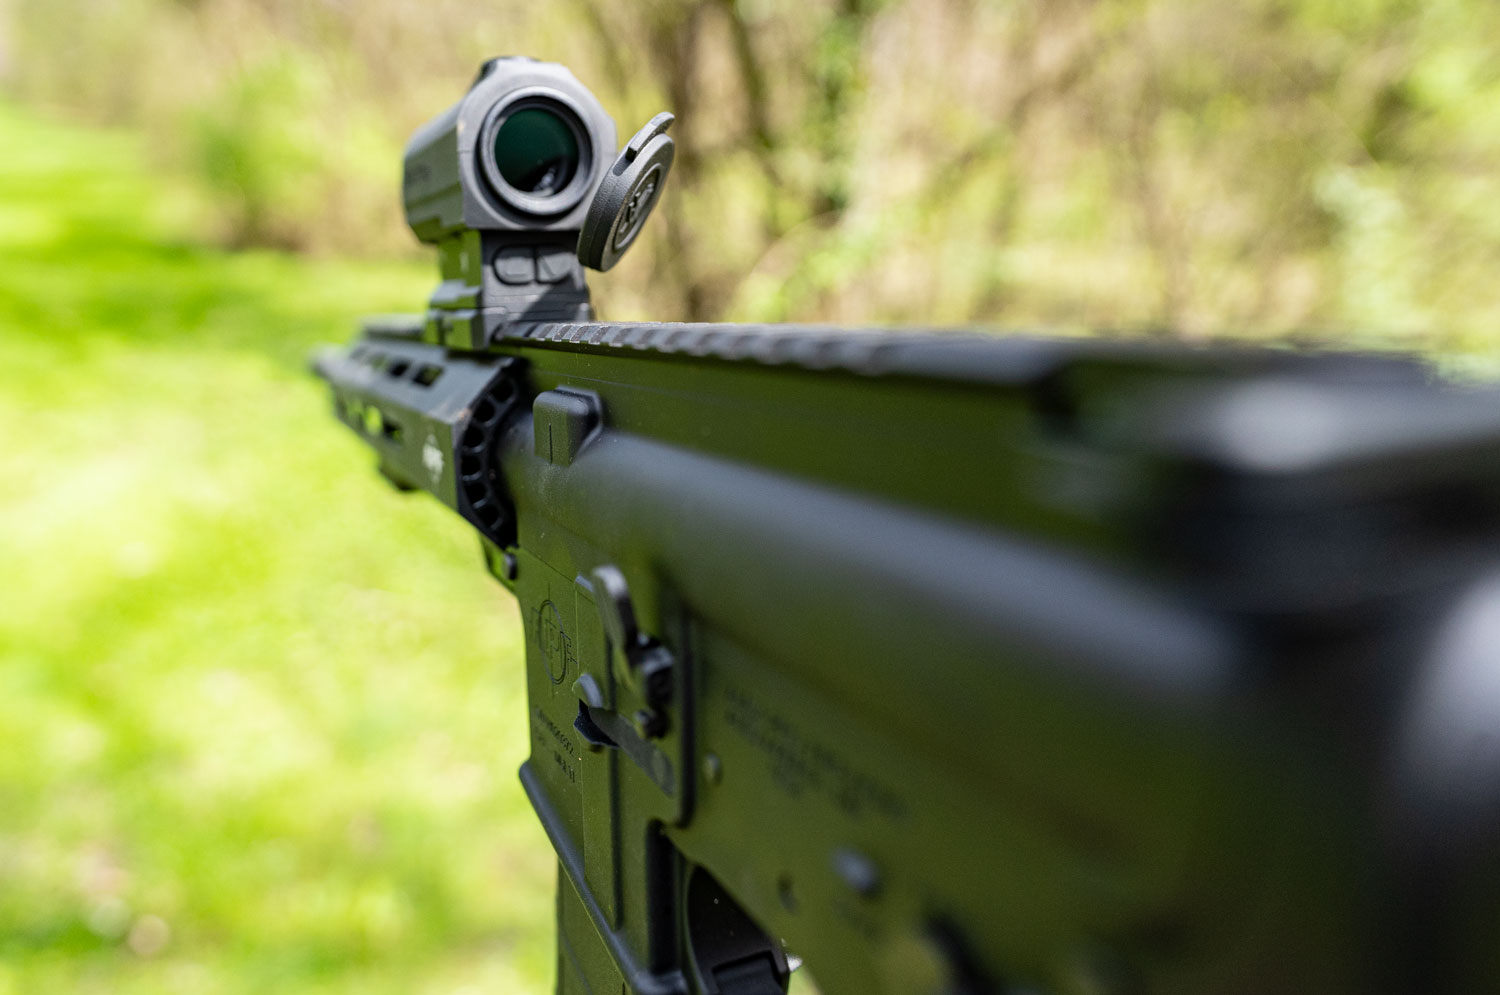 Looking down the barrel of a rifle at a range